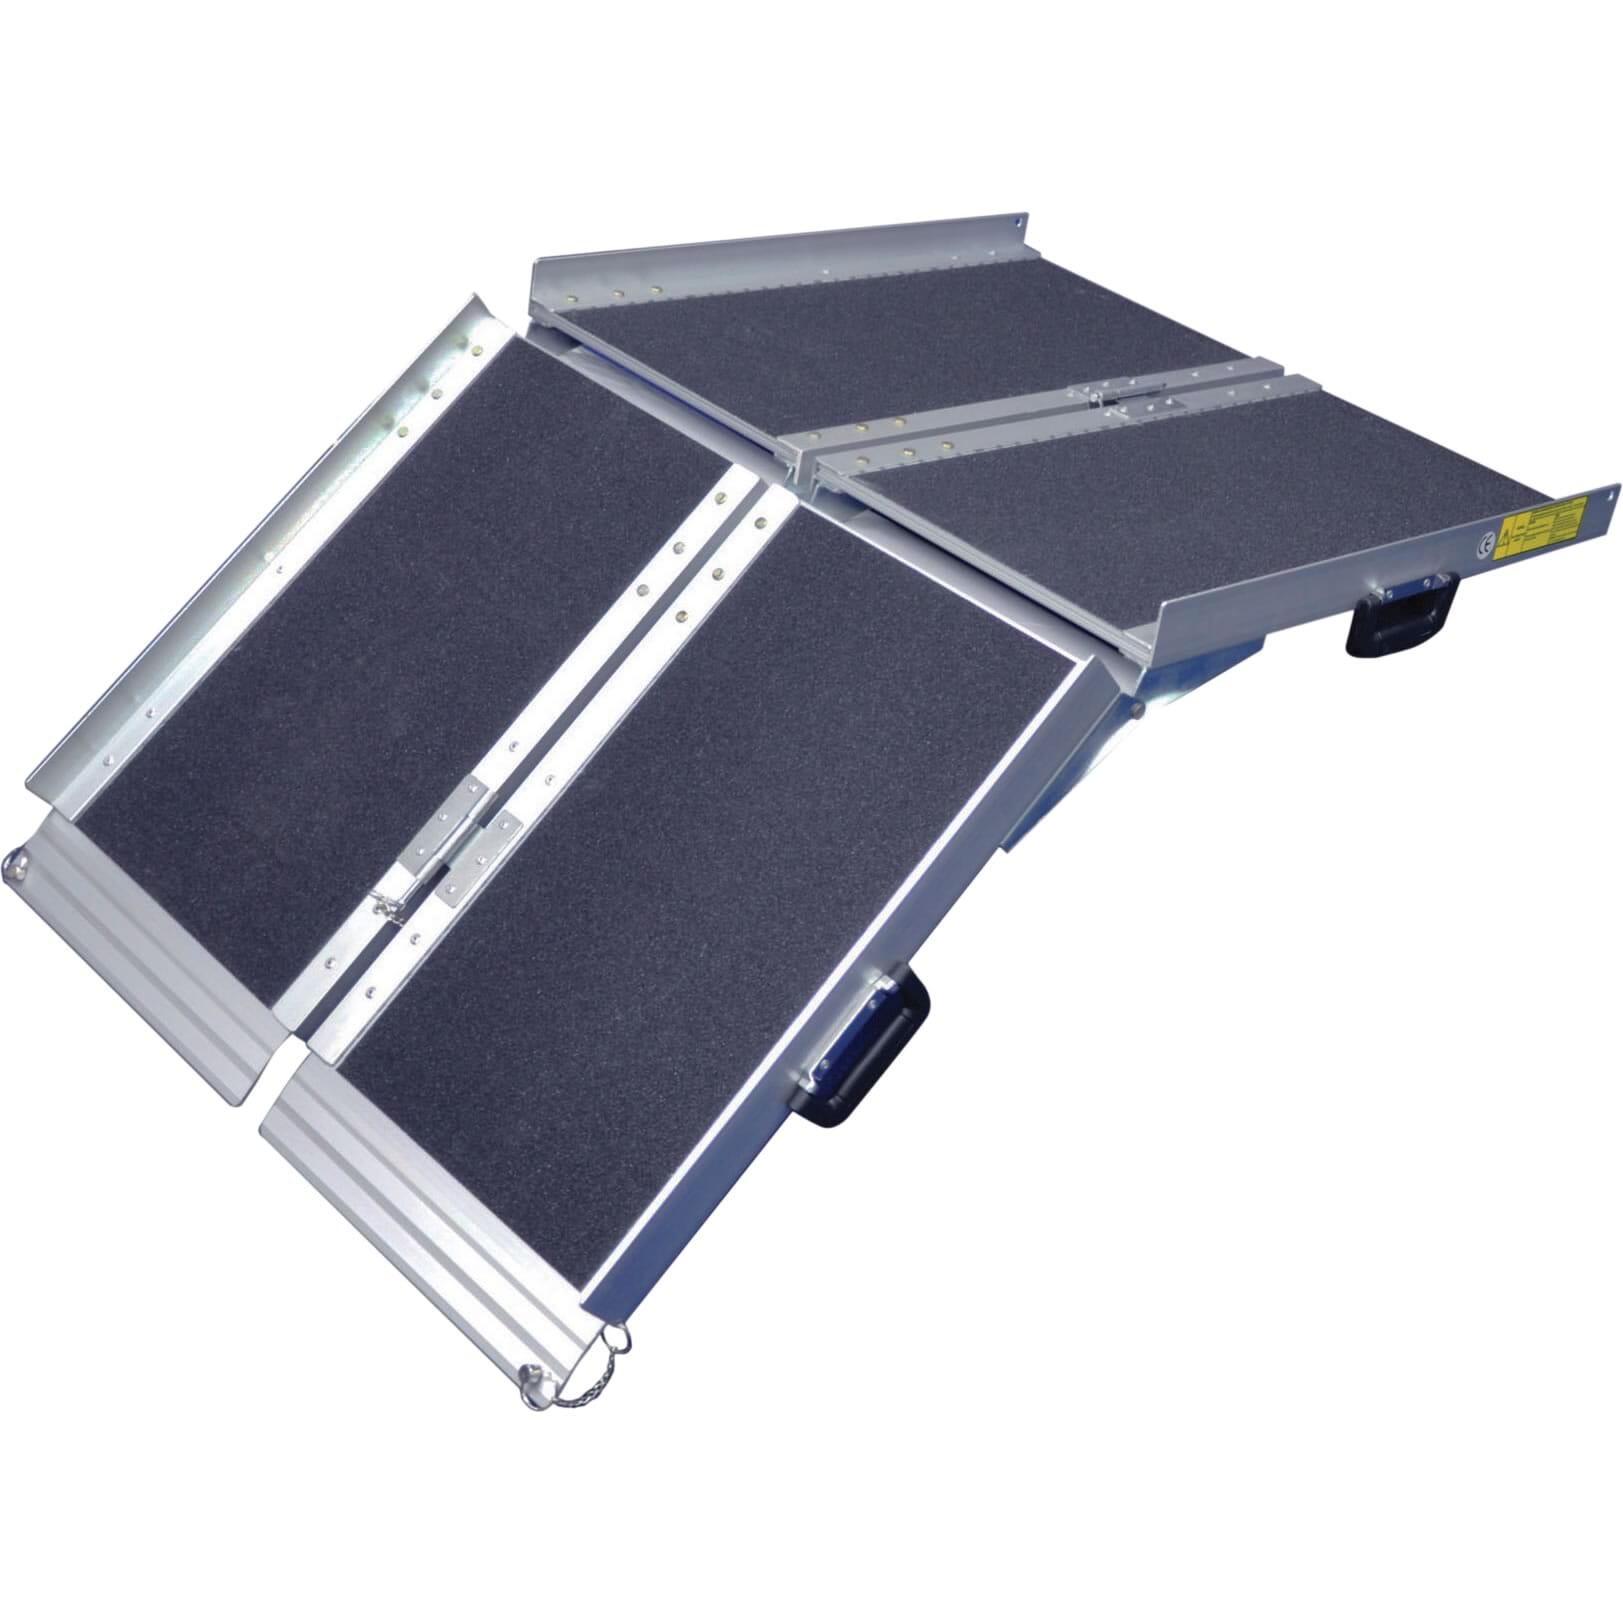 View Multifold Economy Wheelchair Ramps with Grip Surface 8ft 2438mm information